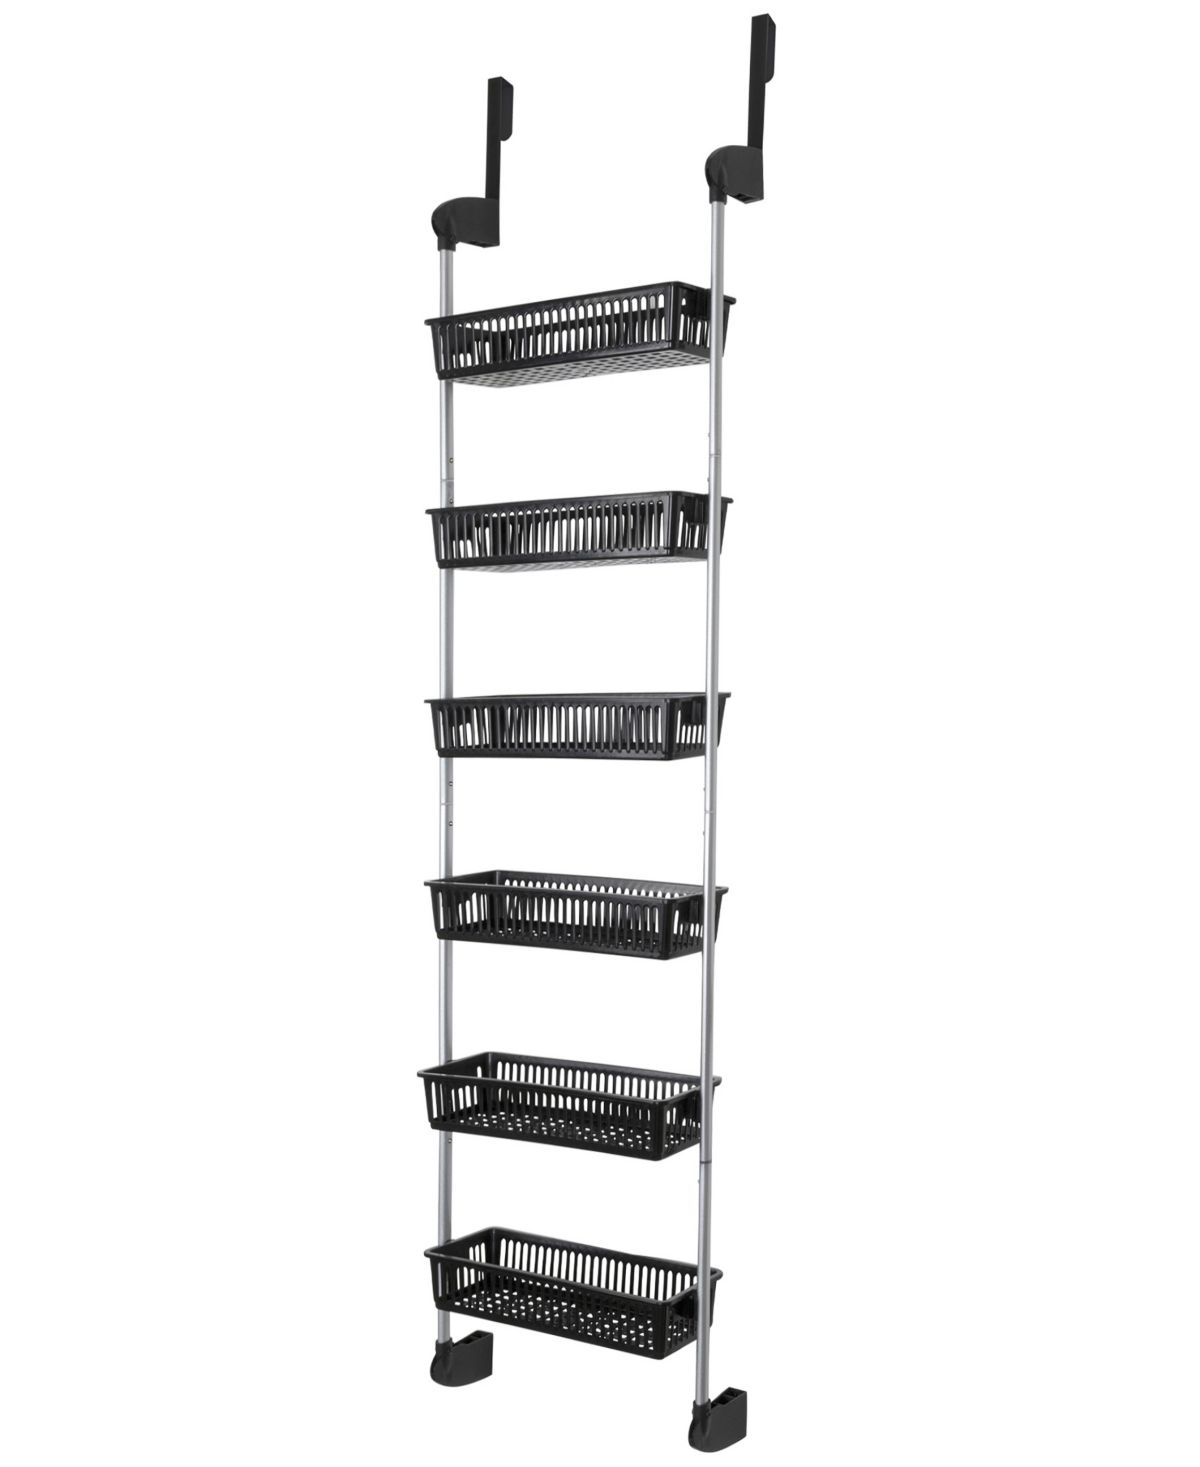 6-Tier Over the Door Pantry Organizer with 6 Full Baskets - Black